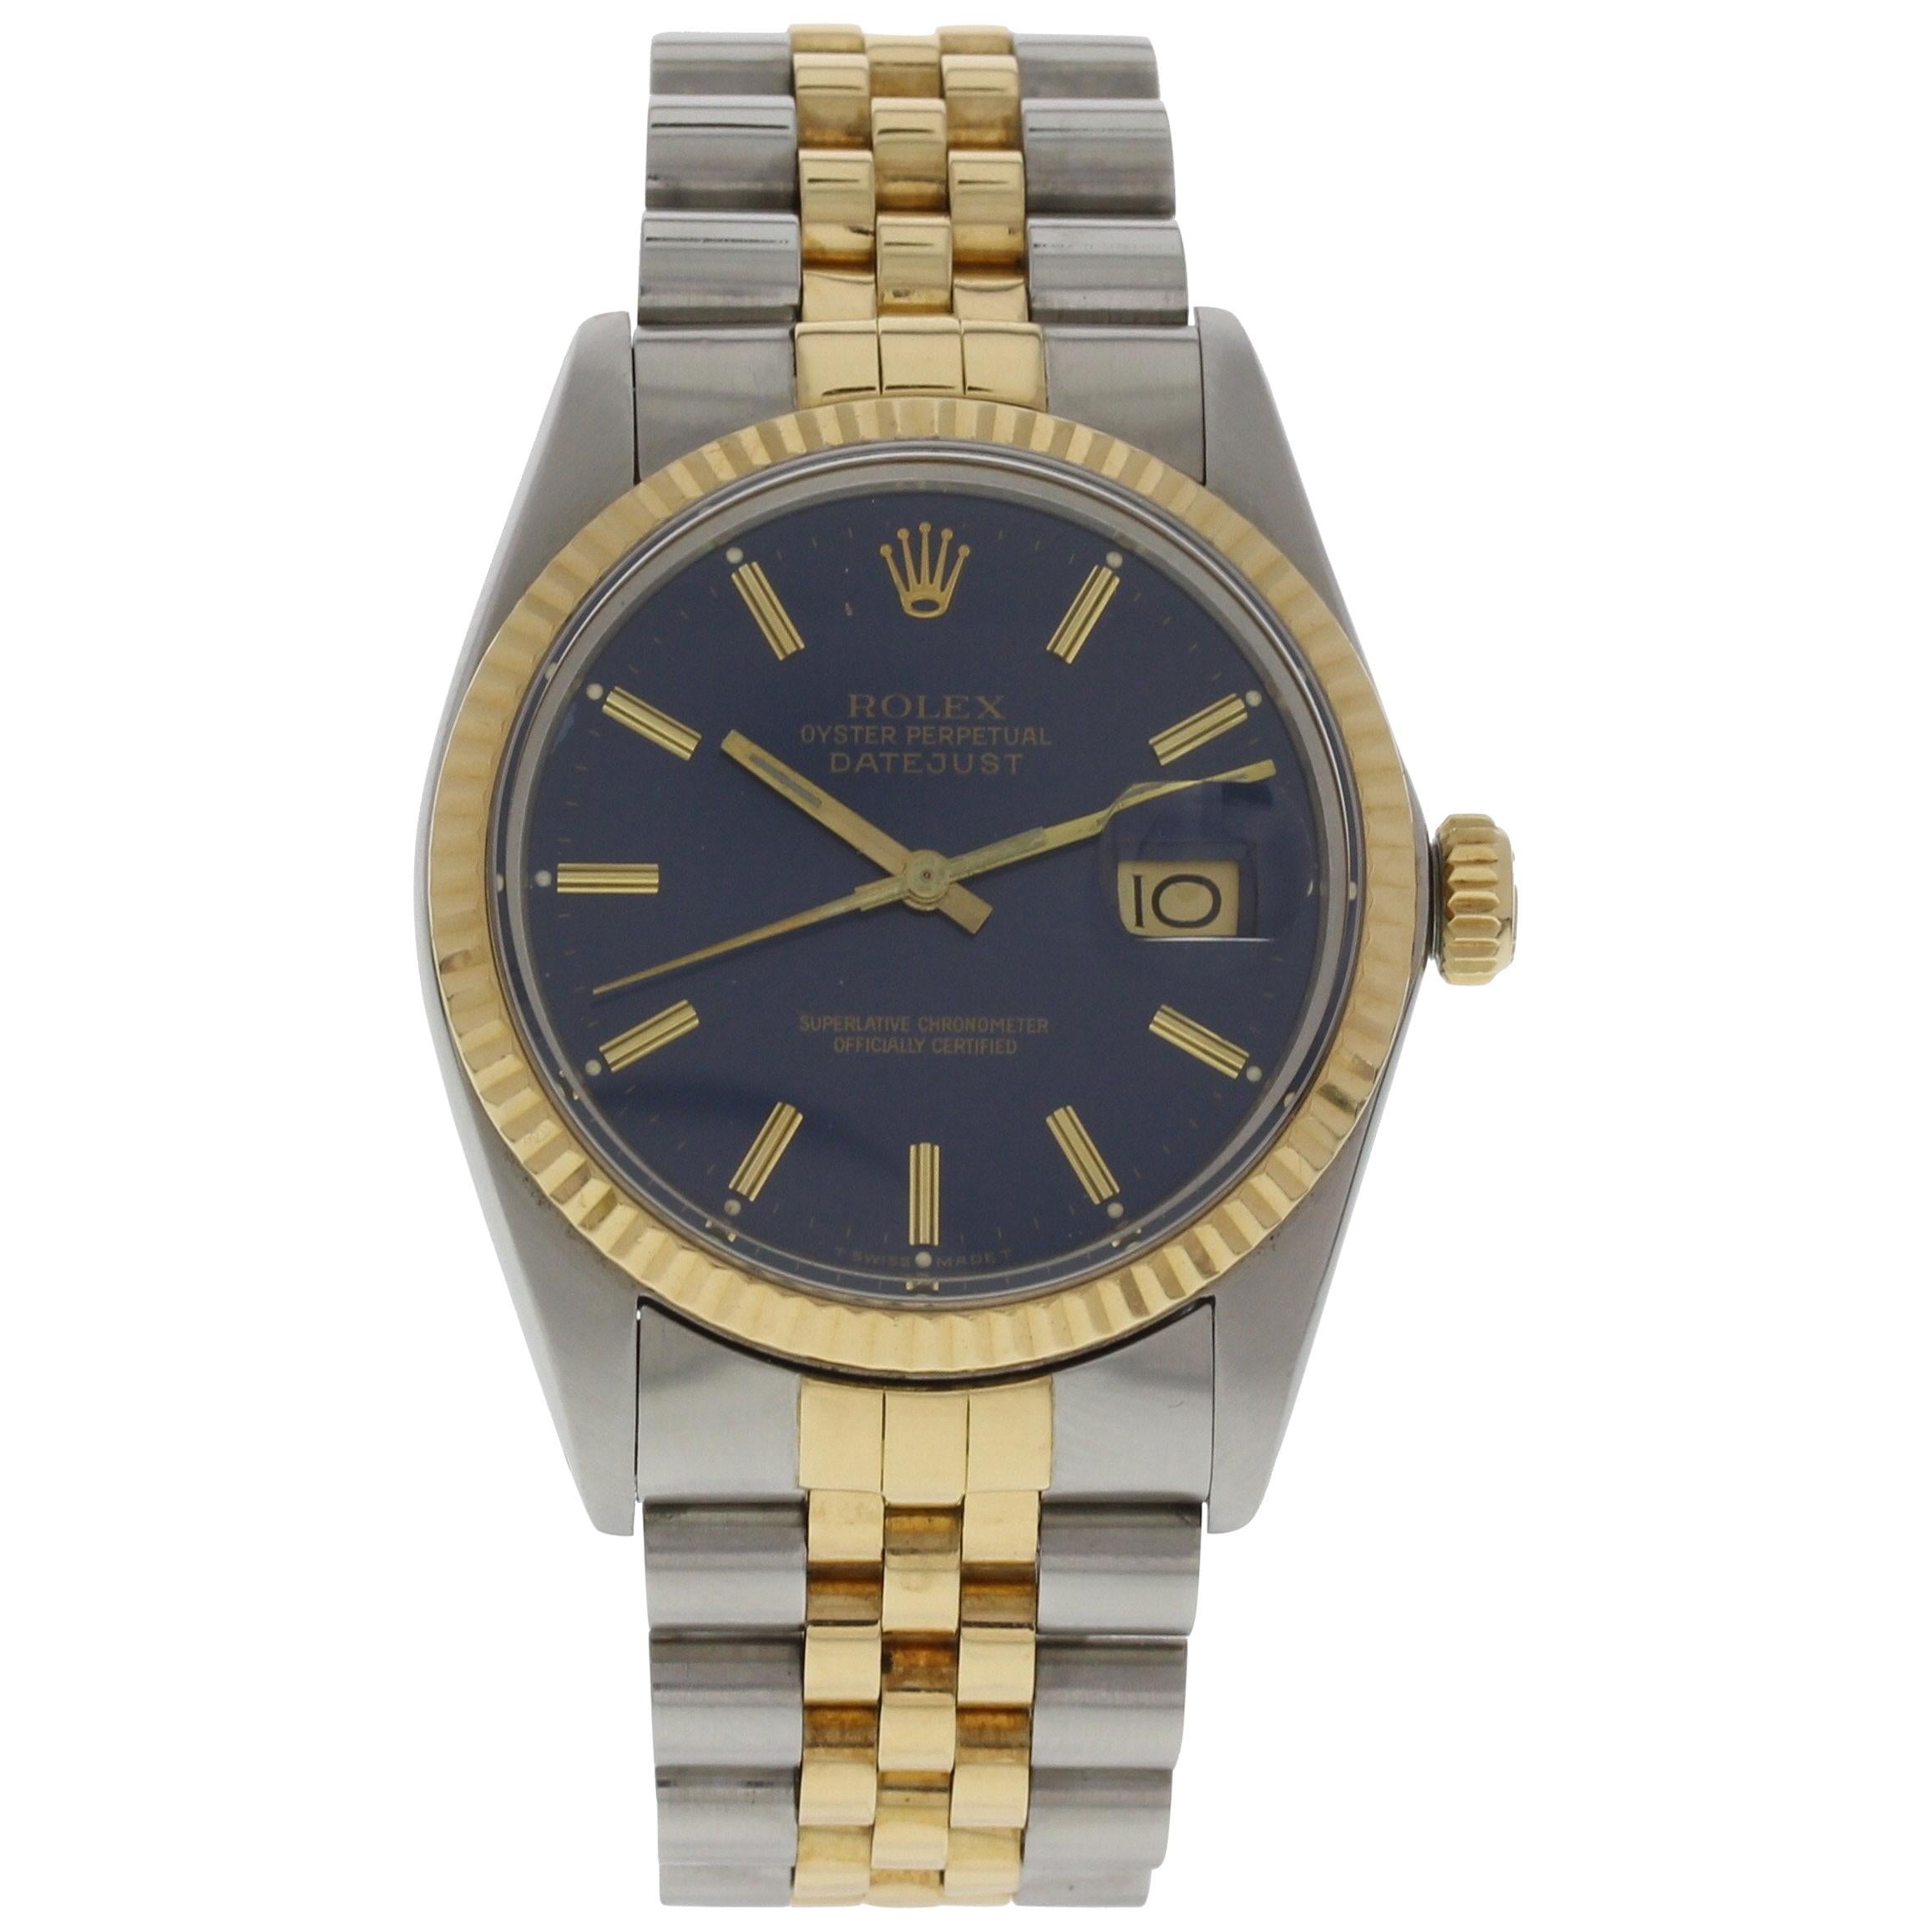 Rolex Oyster Perpetual Datejust 16013 Blue Dial